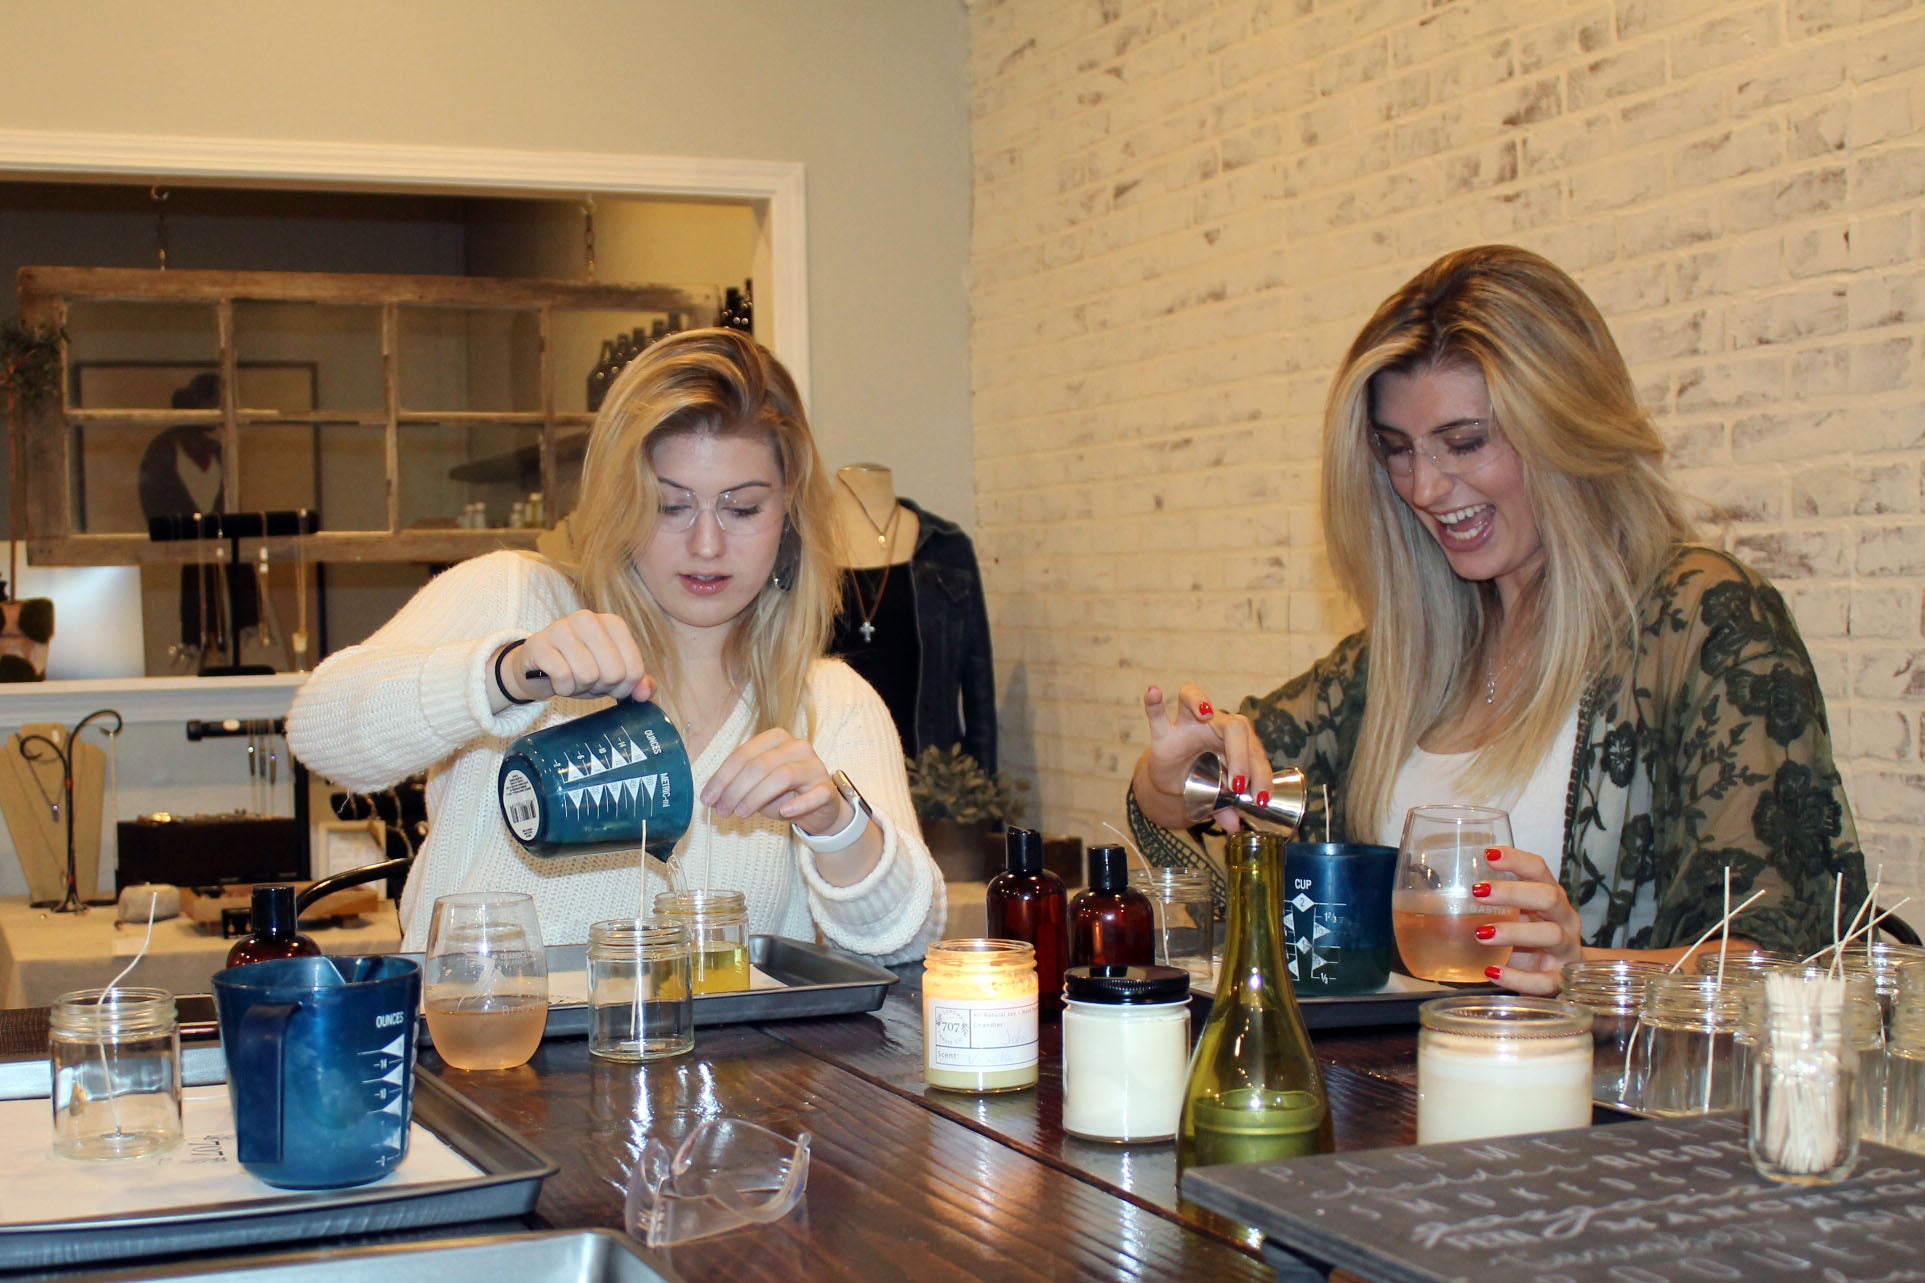 Online] Seasonal Soy Wax Candle Making Class – Assembly: gather +